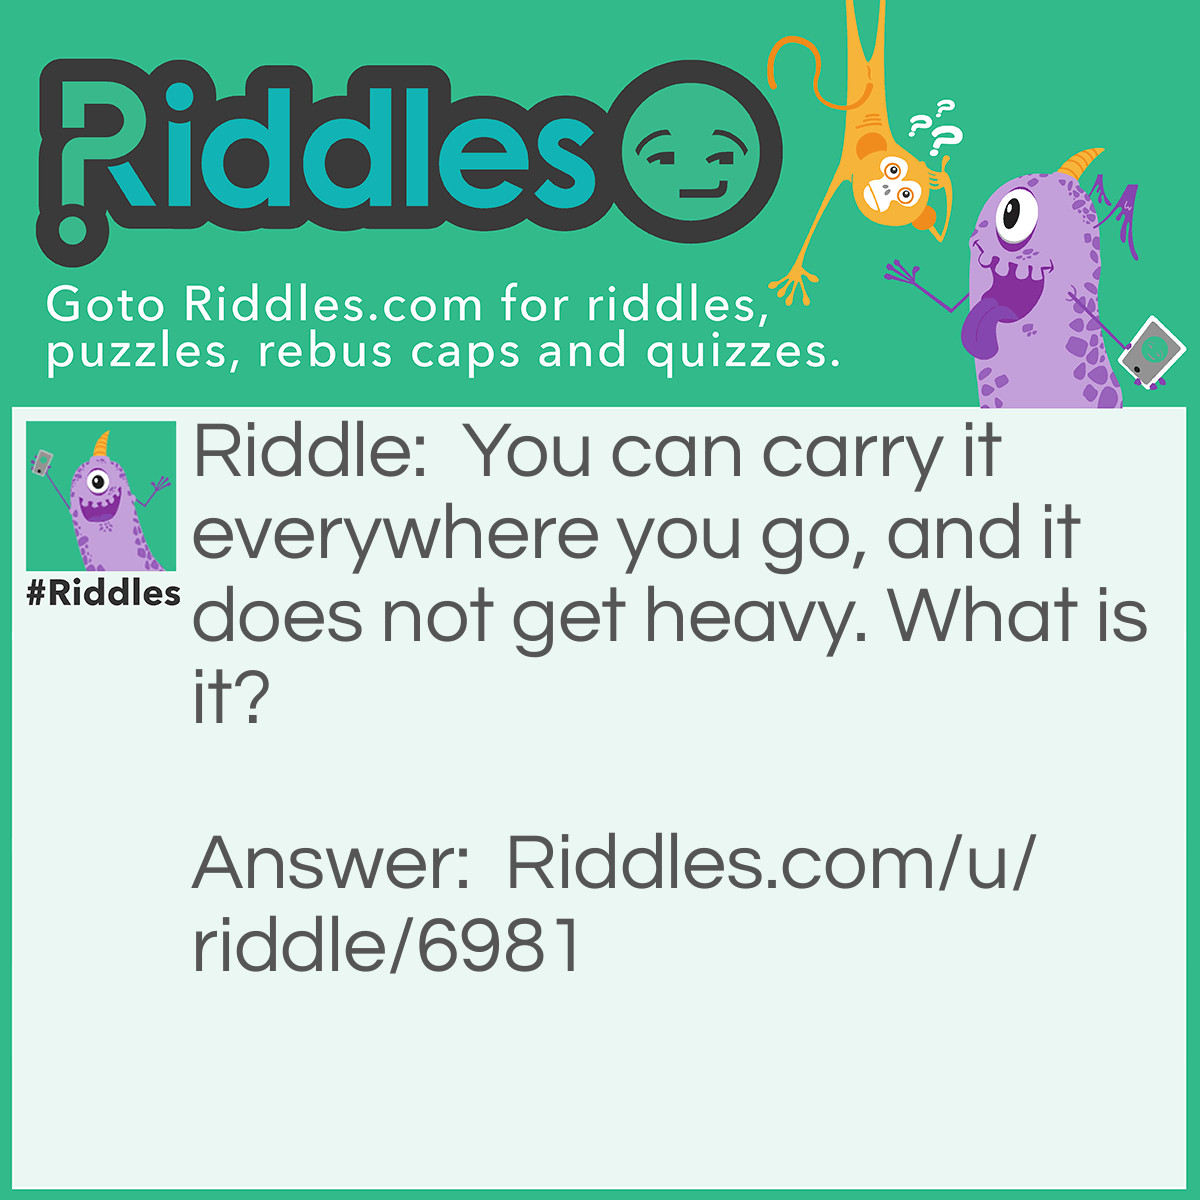 Riddle: You can carry it everywhere you go, and it does not get heavy. What is it? Answer: Your Name